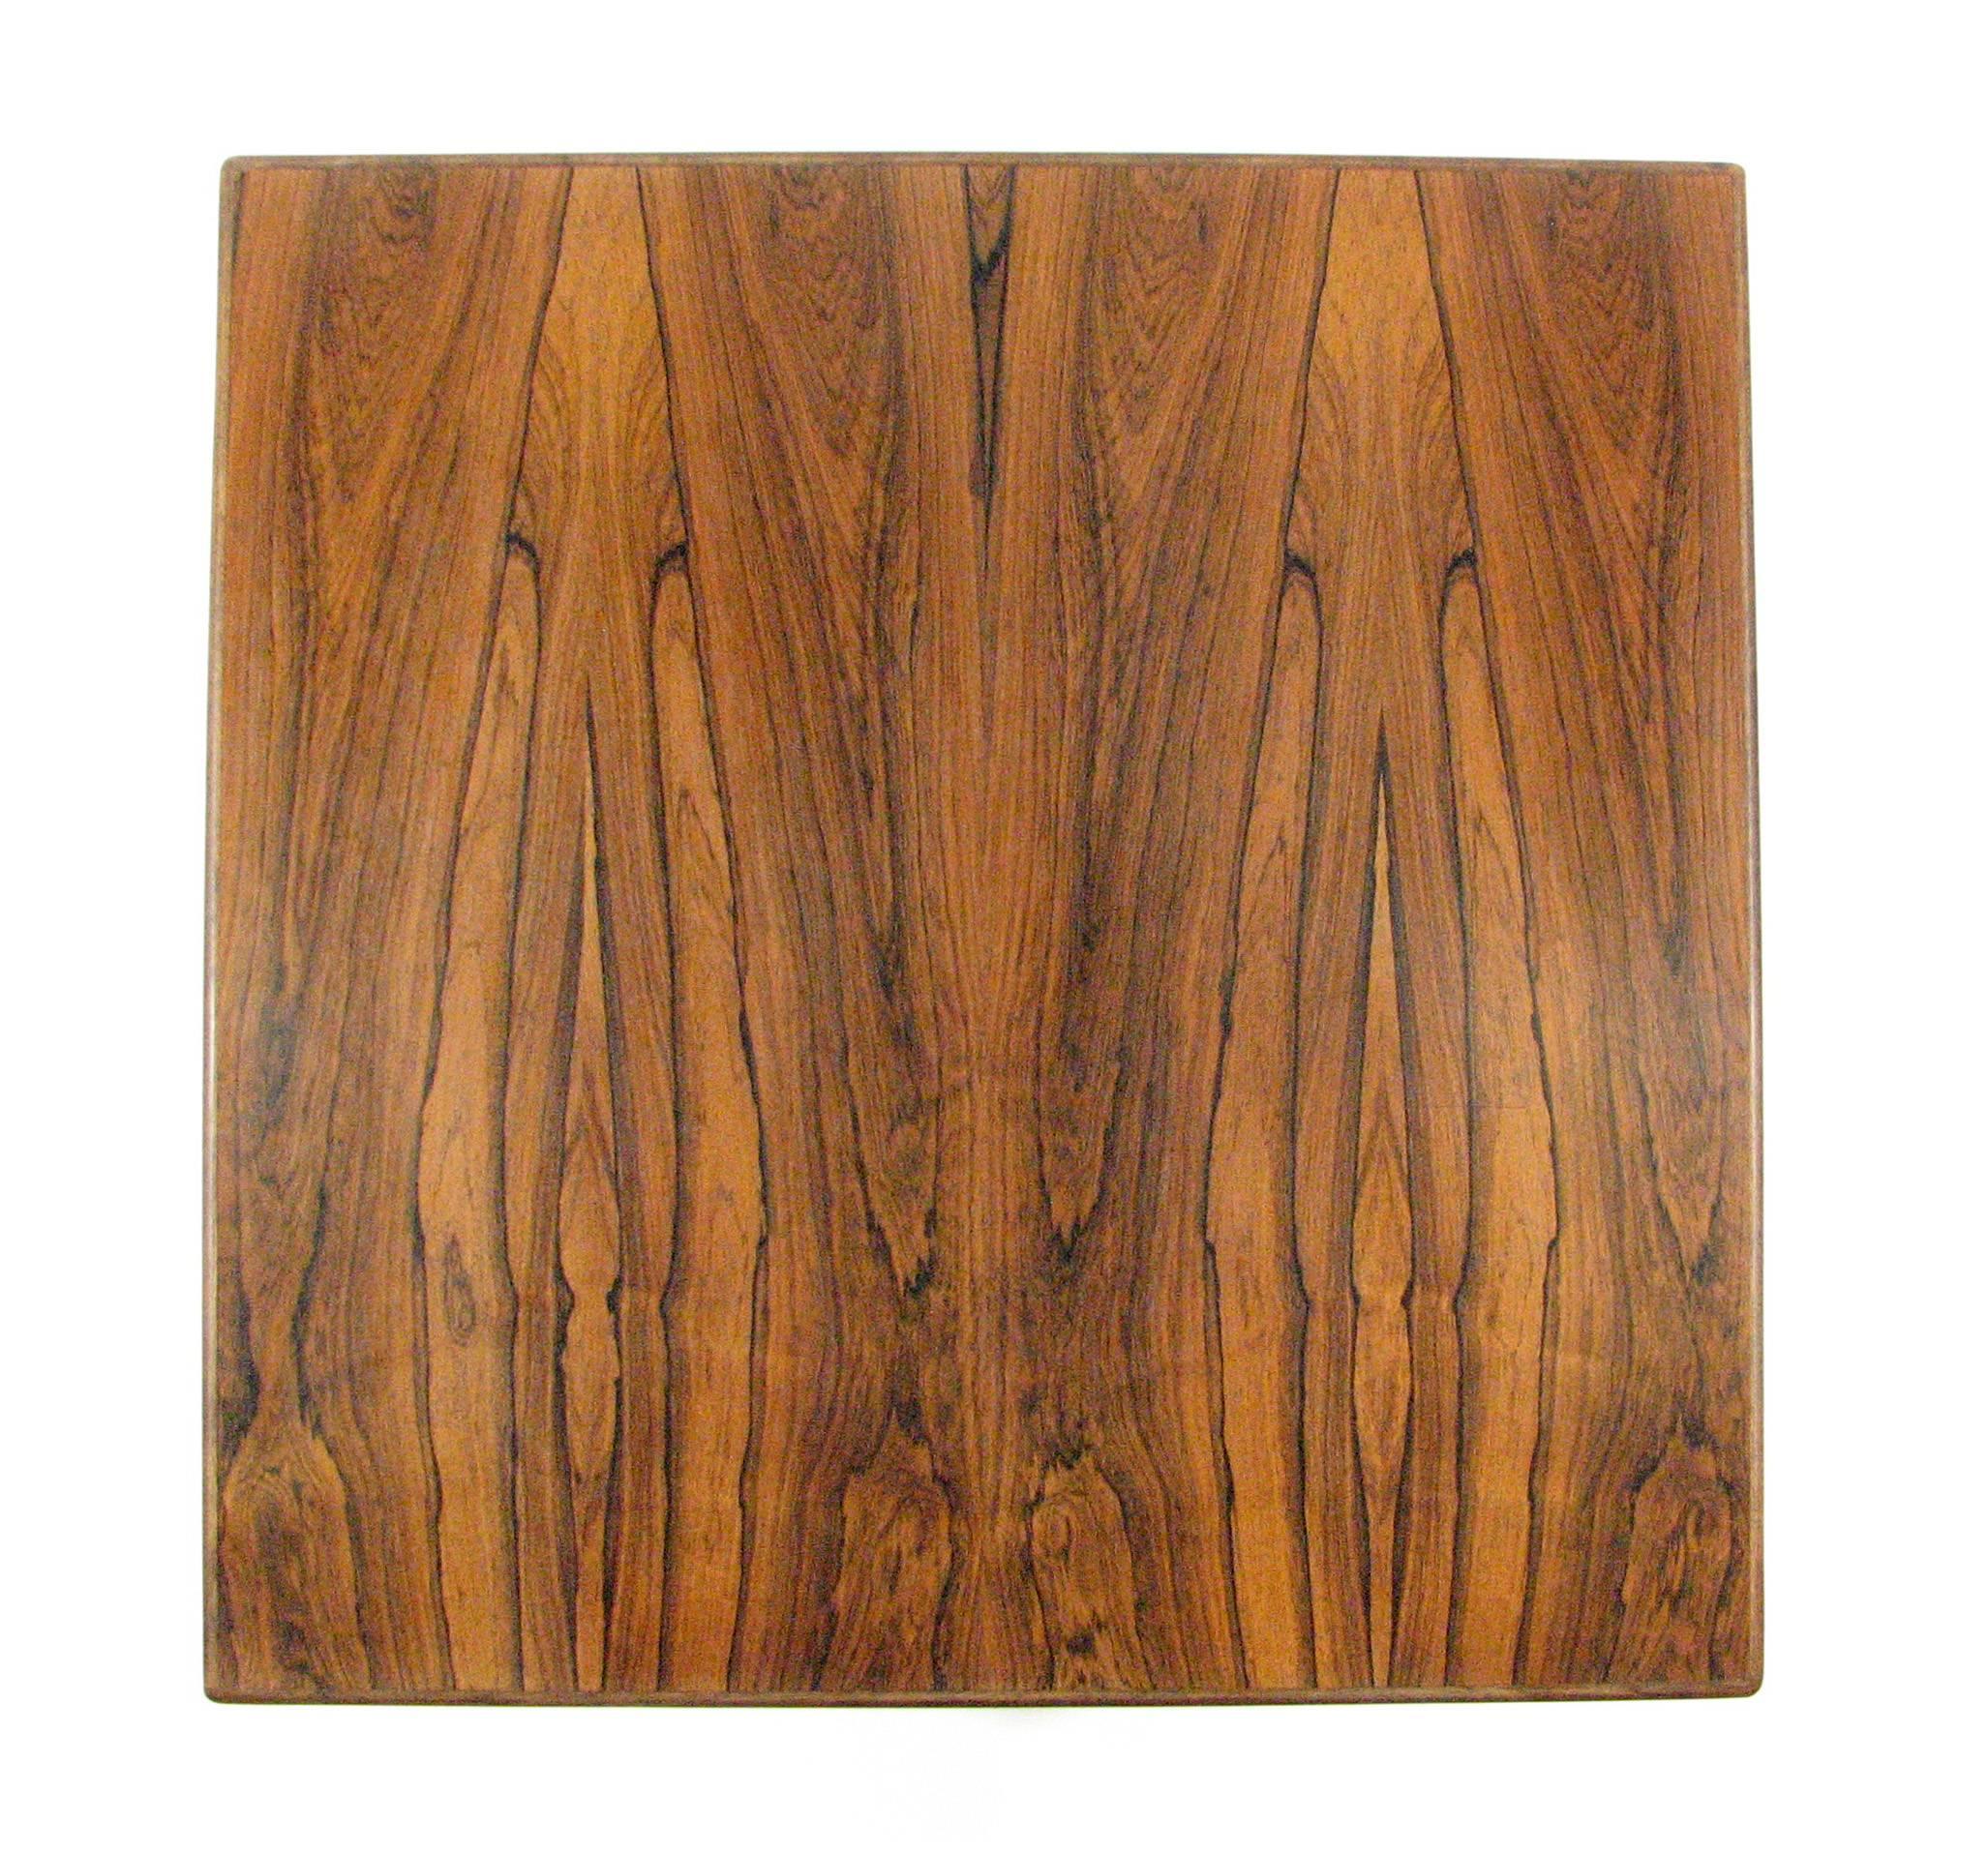 The rosewood grain in this Mid-Century table is stunningly beautiful. Sized to serve as either a cocktail table or side table. 

There are no markings, so its exact provenance is unknown.